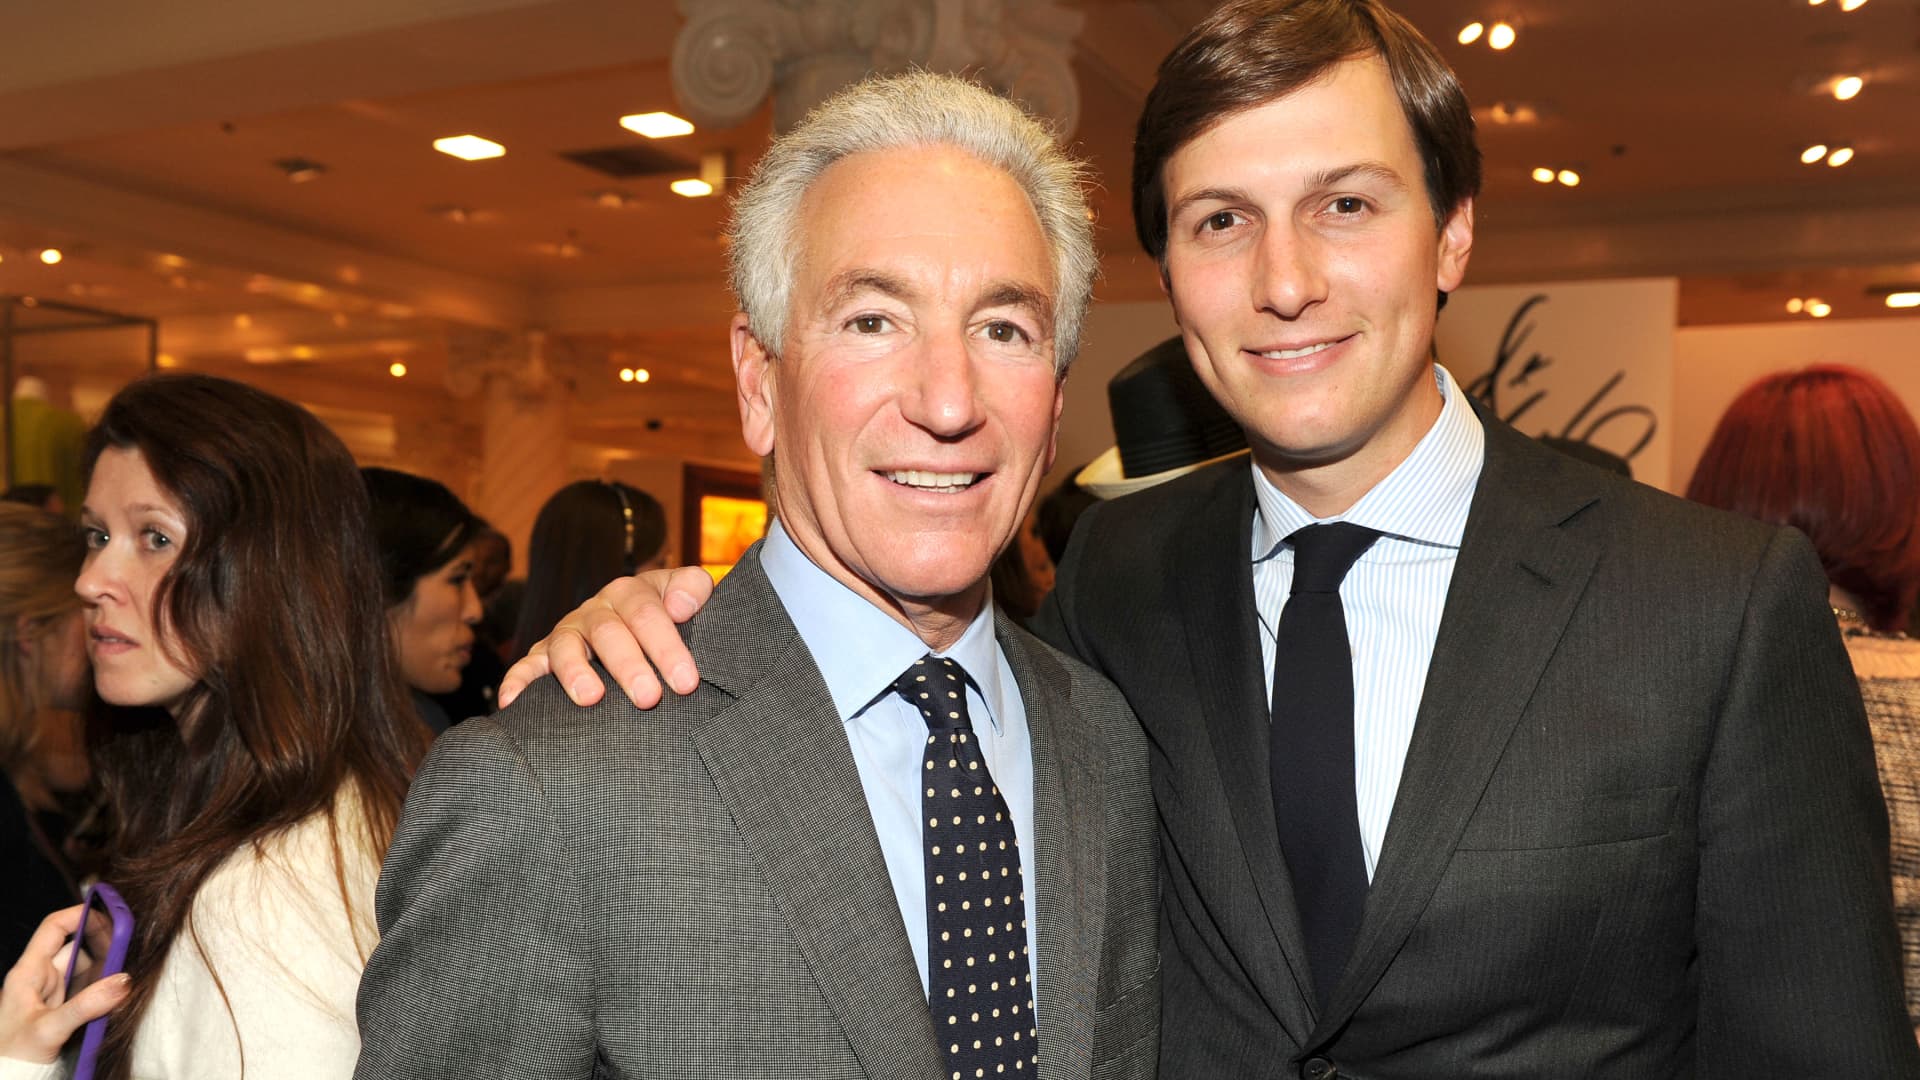 Charles Kushner and Jared Kushner attend an event at Lord & Taylor on March 28, 2012 in New York City.